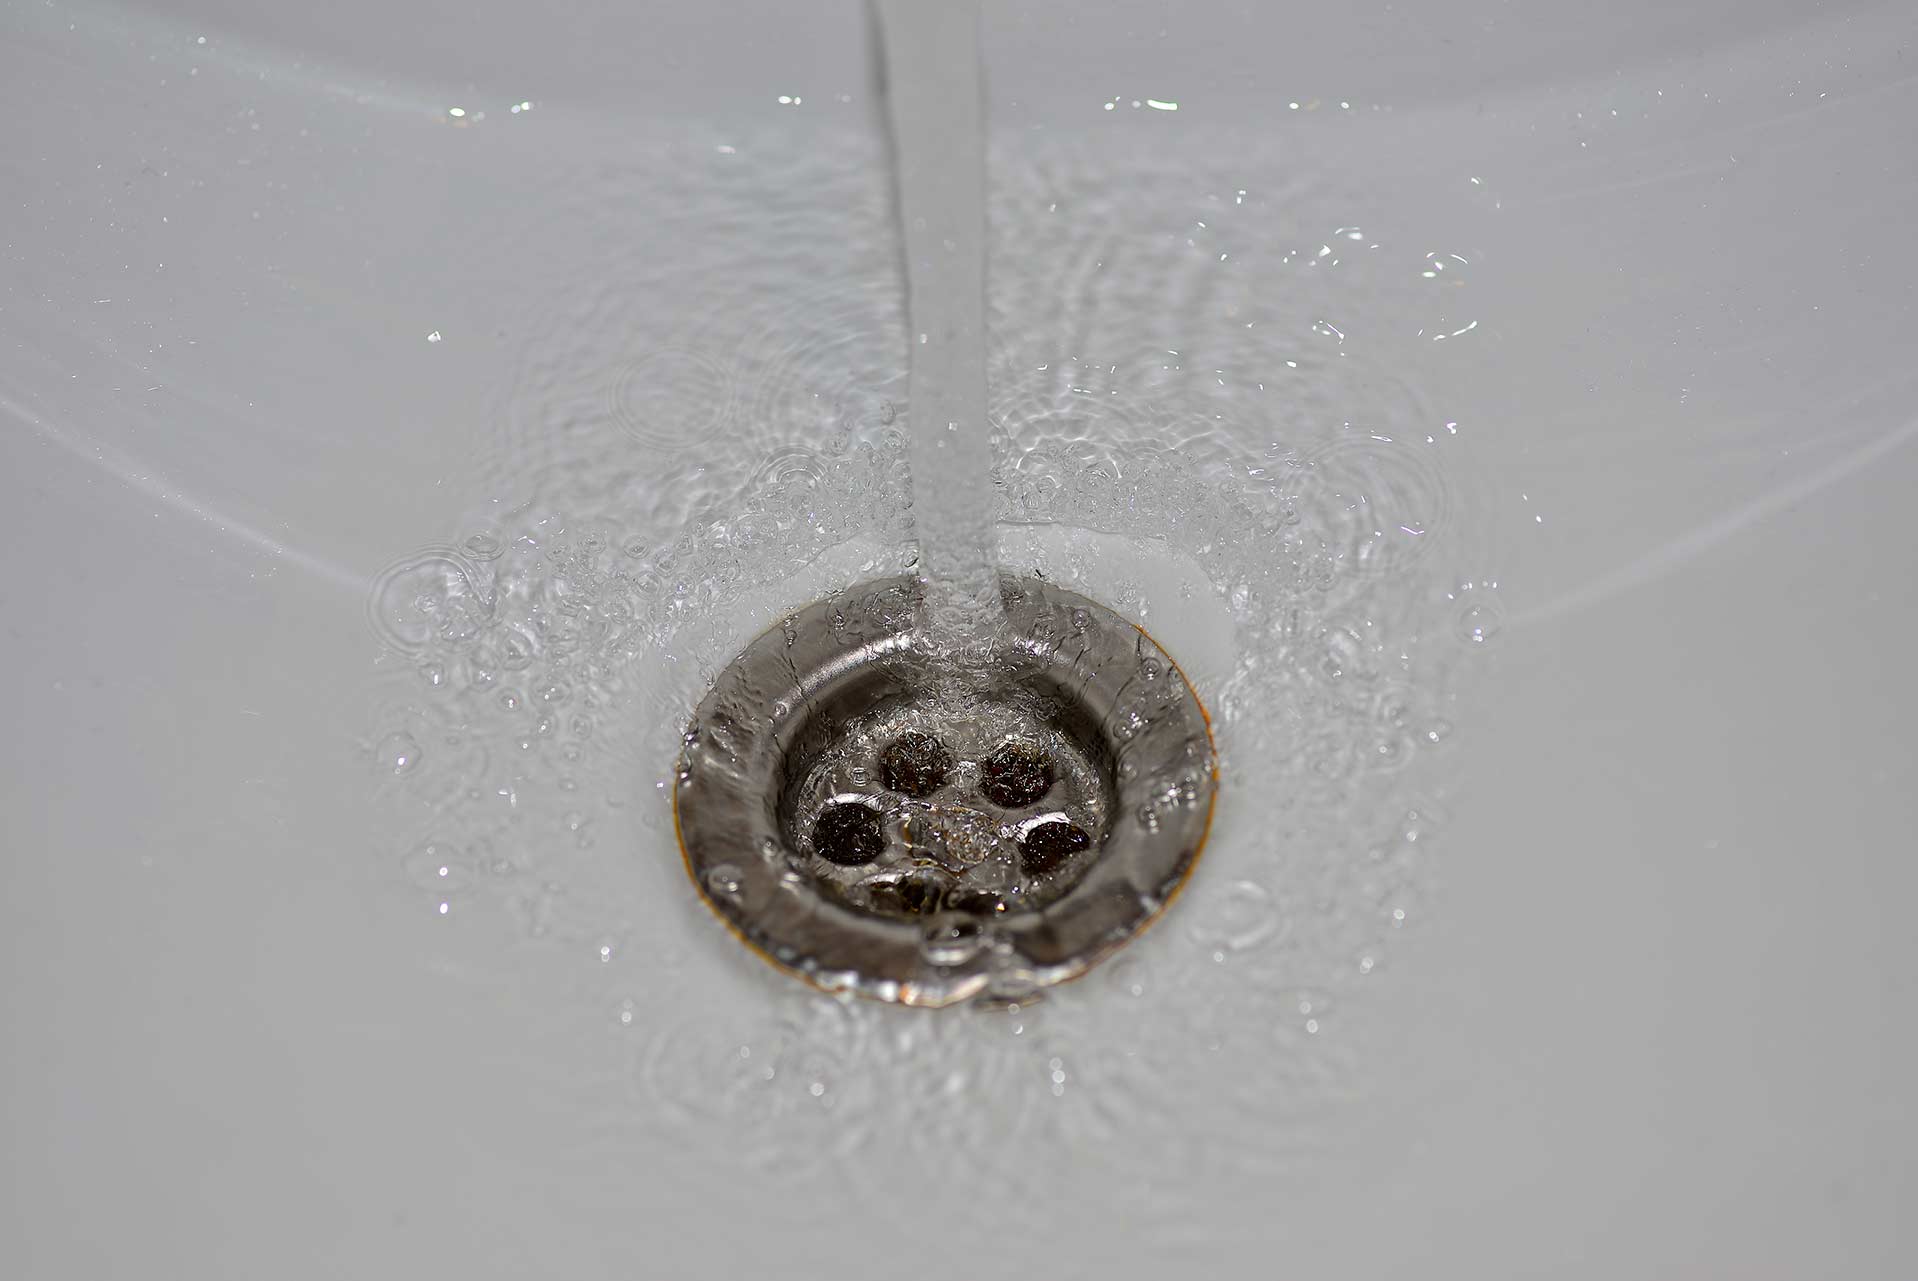 A2B Drains provides services to unblock blocked sinks and drains for properties in Sunderland.